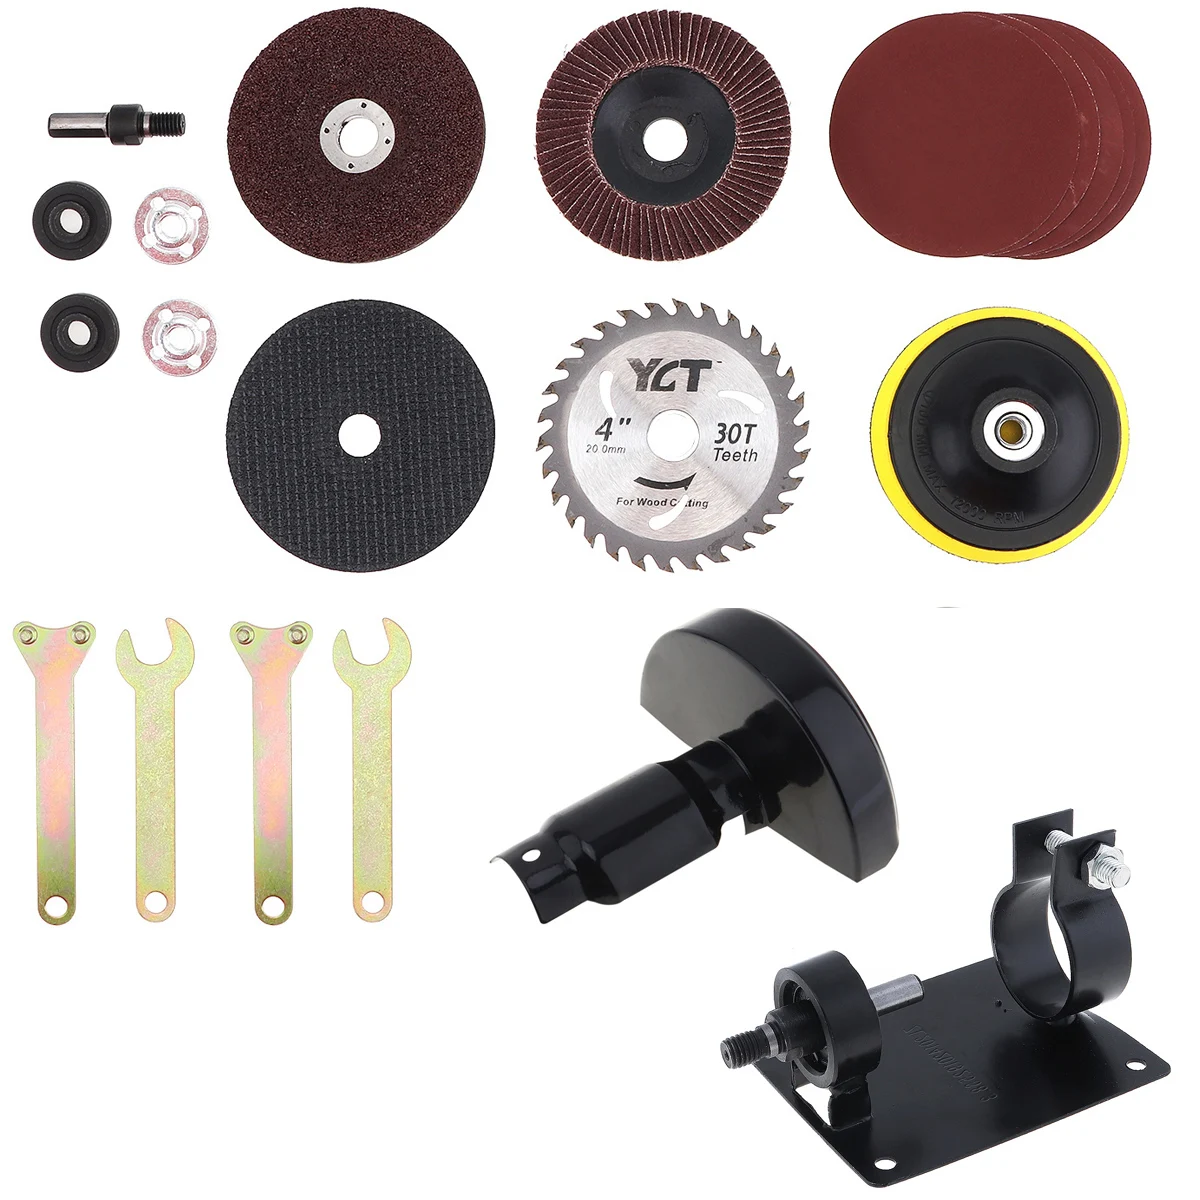 

4-21pcs Electric Drill Conversion Accessories Tools Set Angle Grinder Cutting Blades Grinding Wheel for Wood Metal Polishing